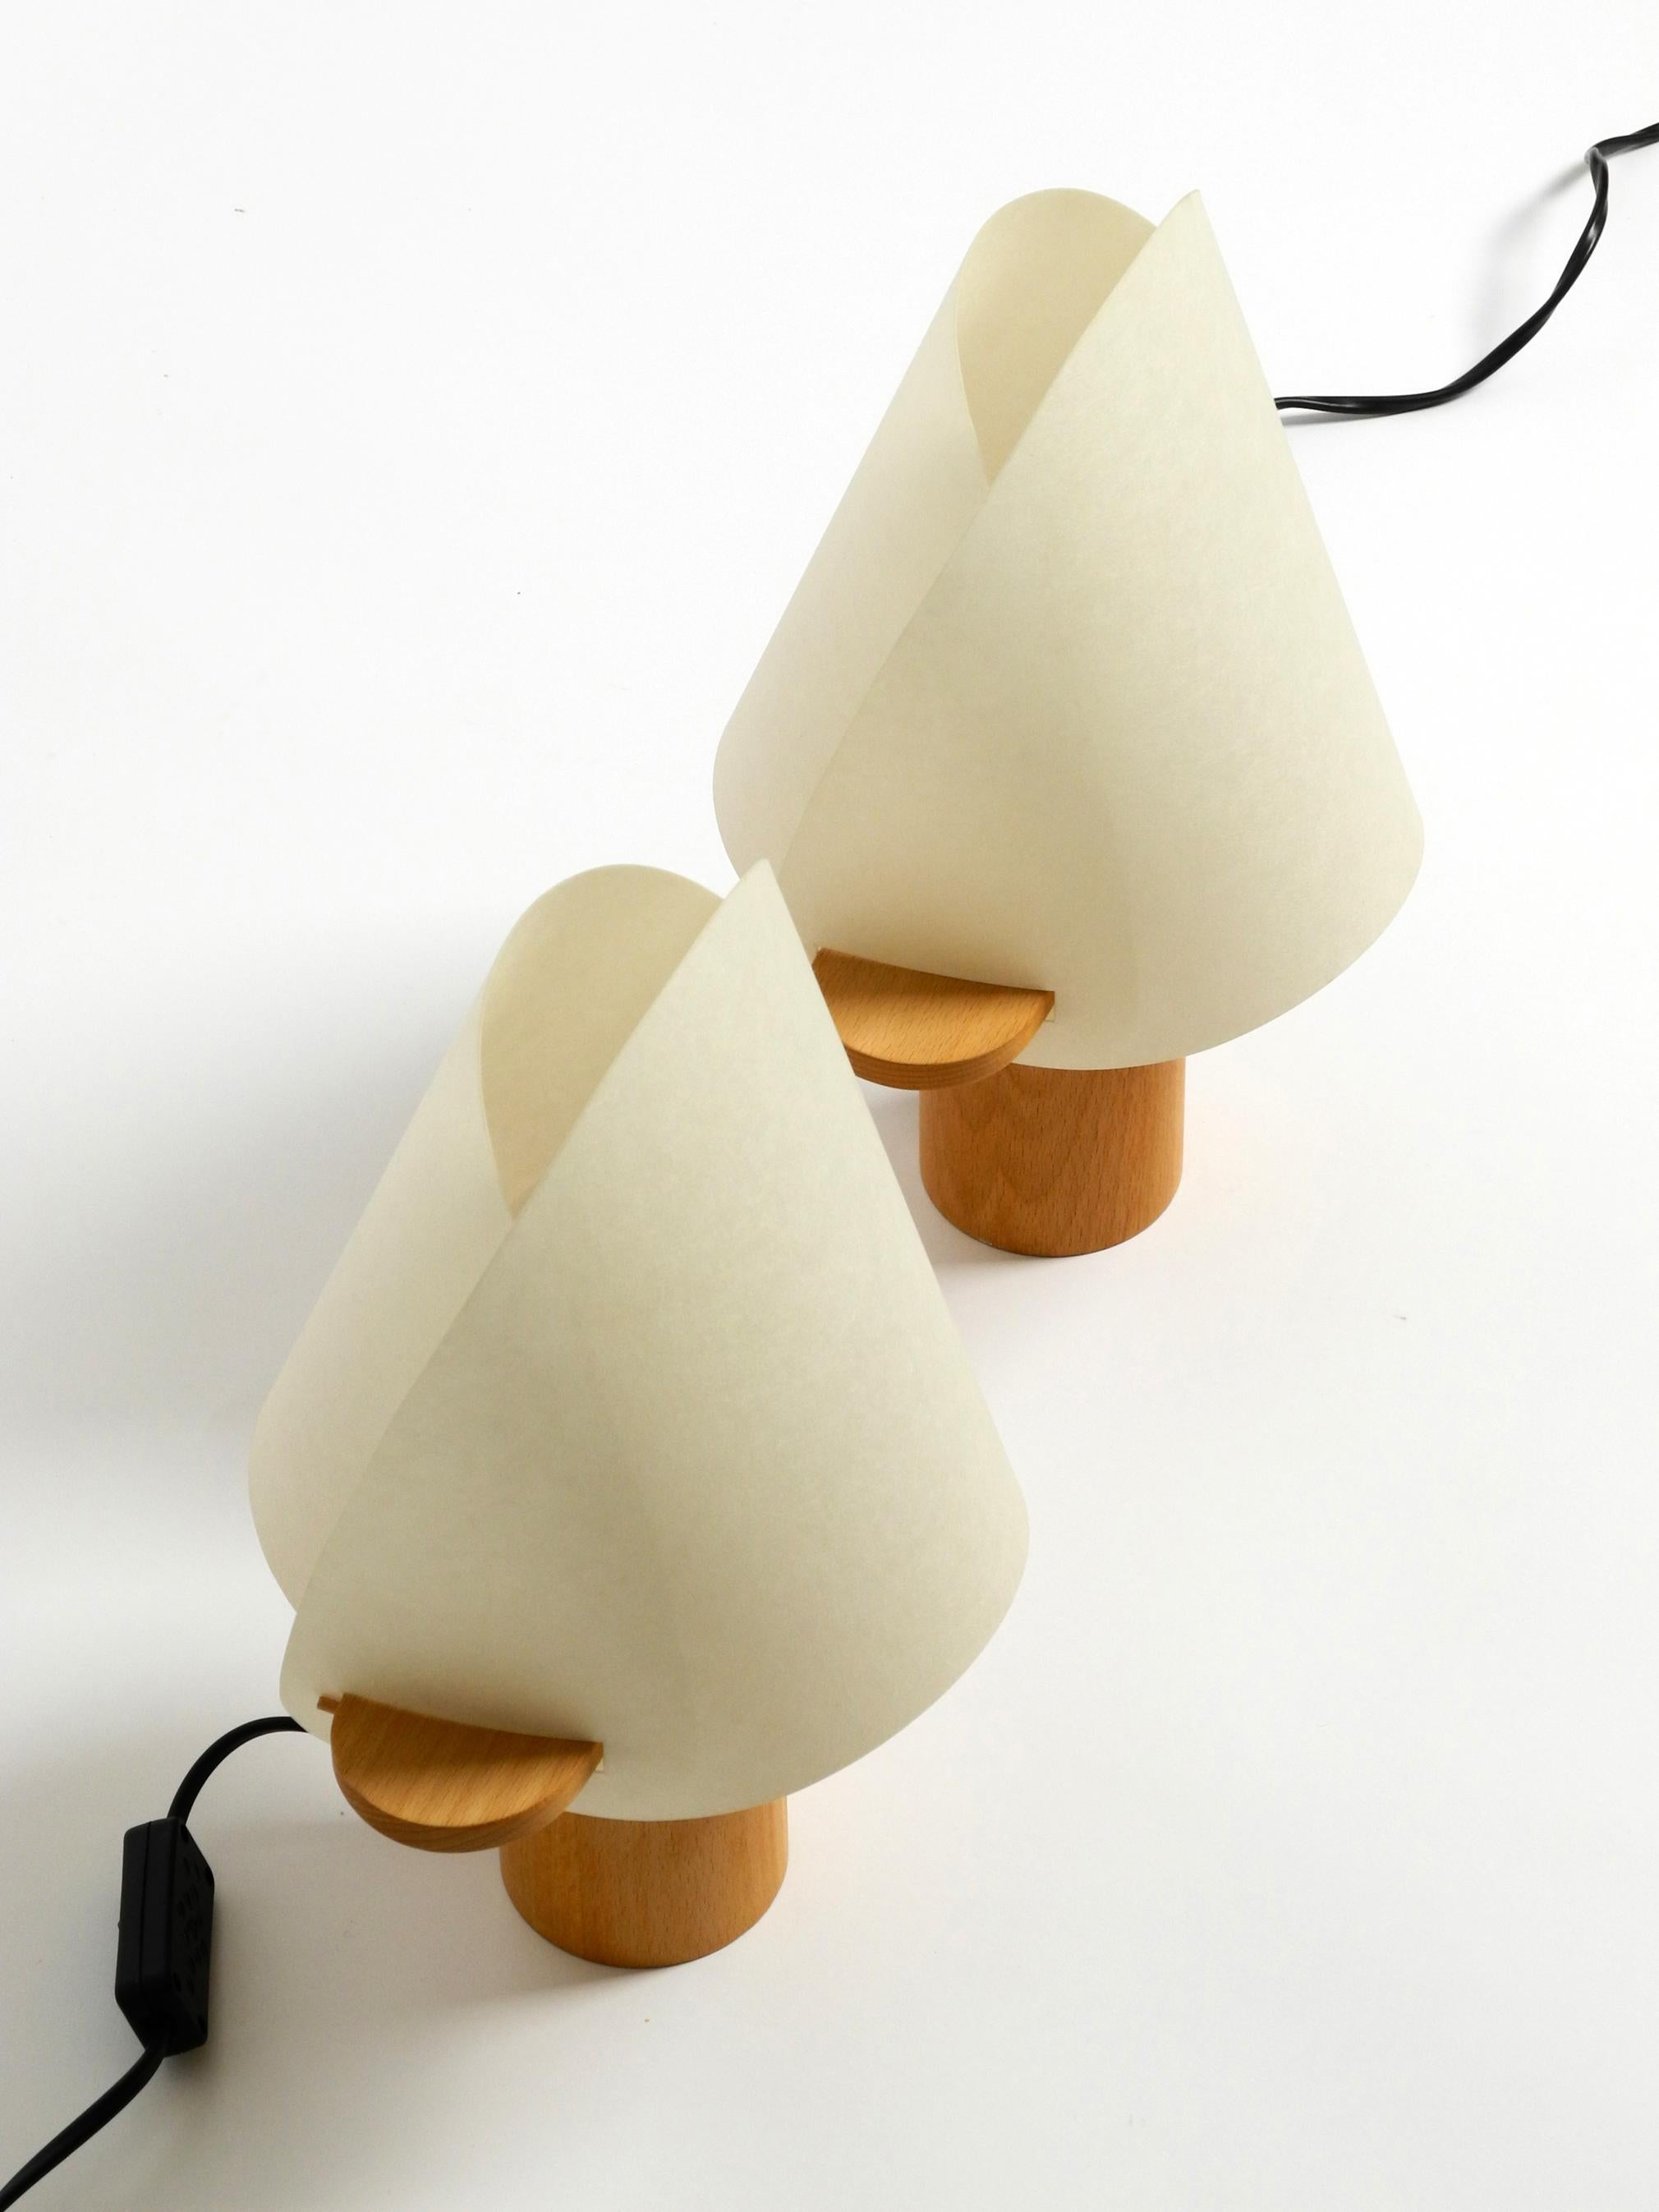 Two Charming Minimalistic Oak Table Lamps with Lunopal Shades by Domus  1980s For Sale 8